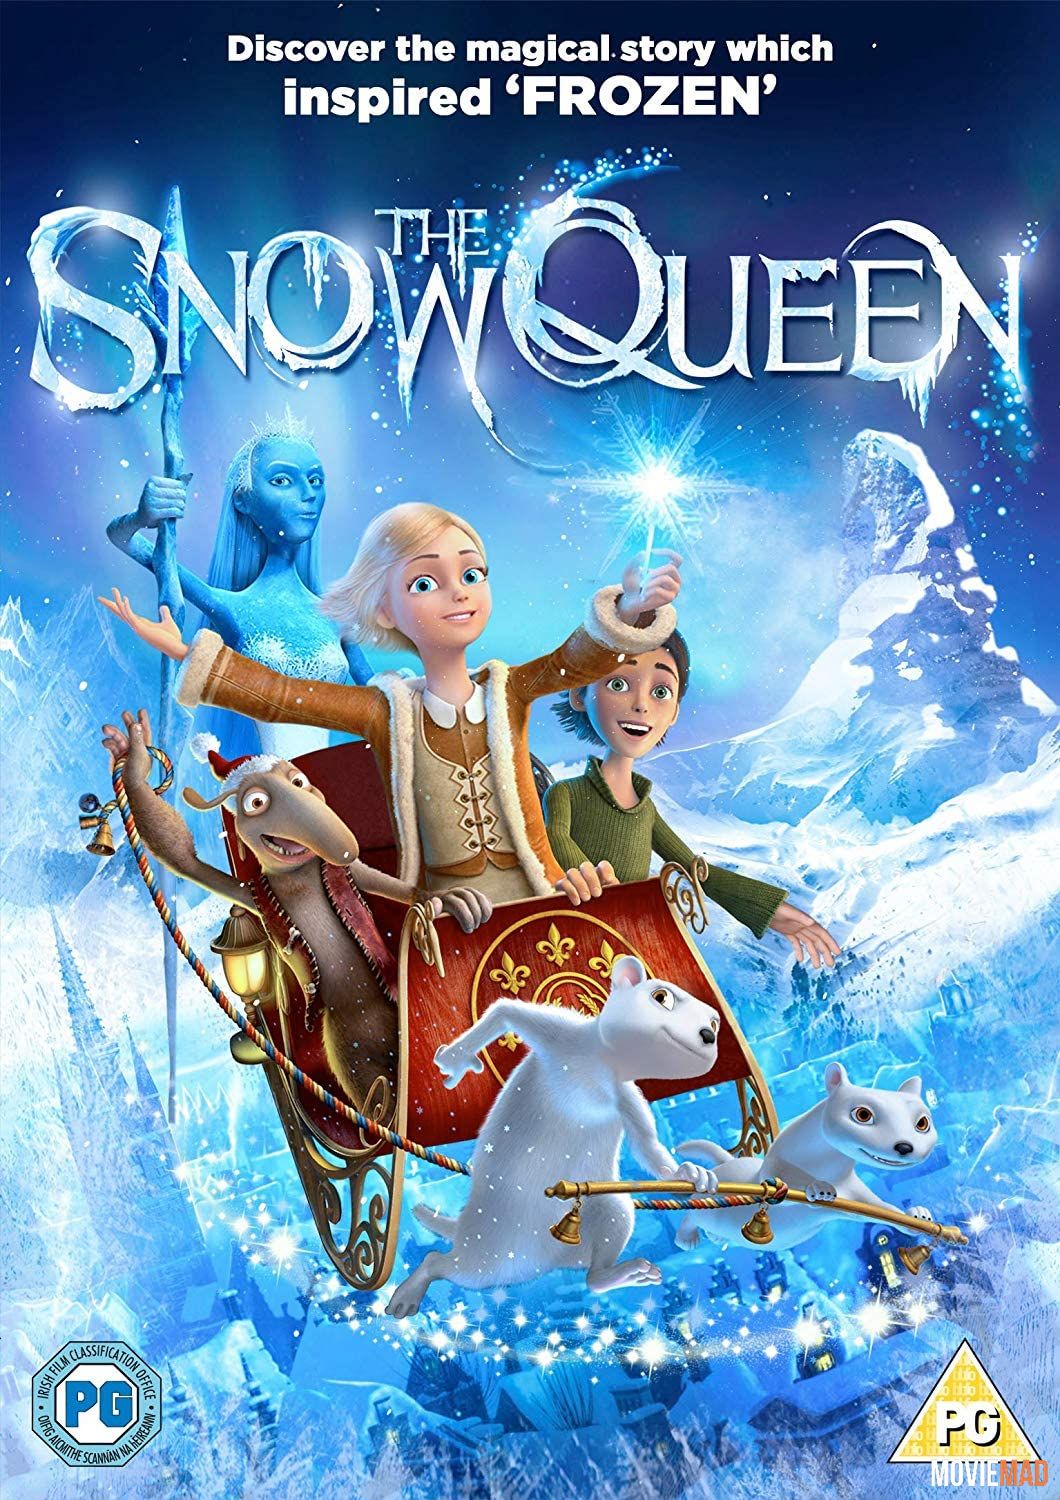 The Snow Queen (2012) Hindi Dubbed ORG BluRay Full Movie 1080p 720p 480p